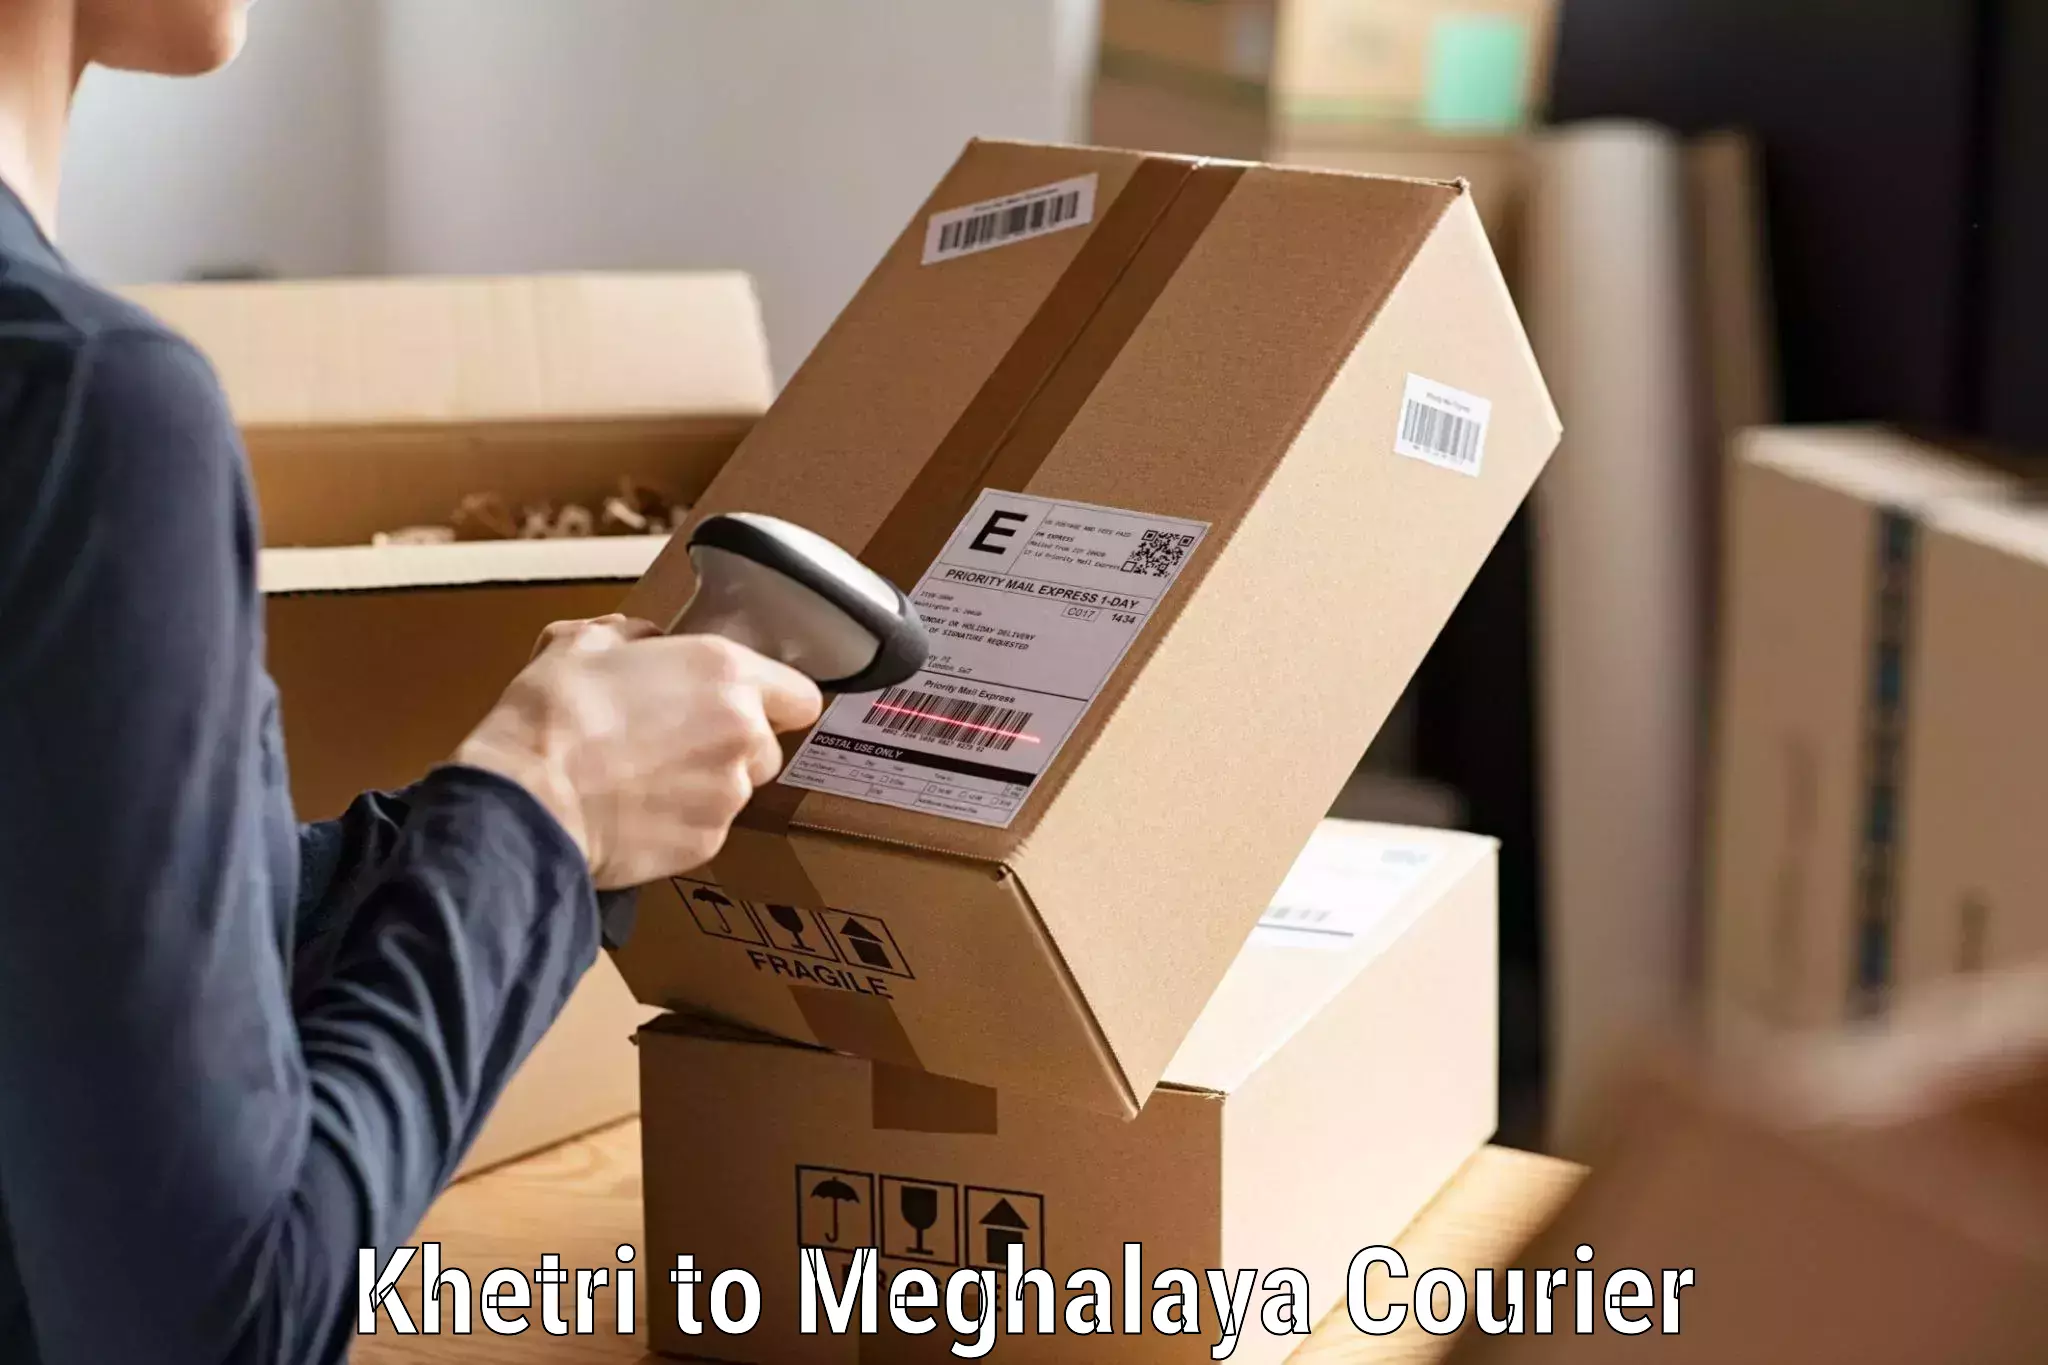 Efficient package consolidation in Khetri to Shillong